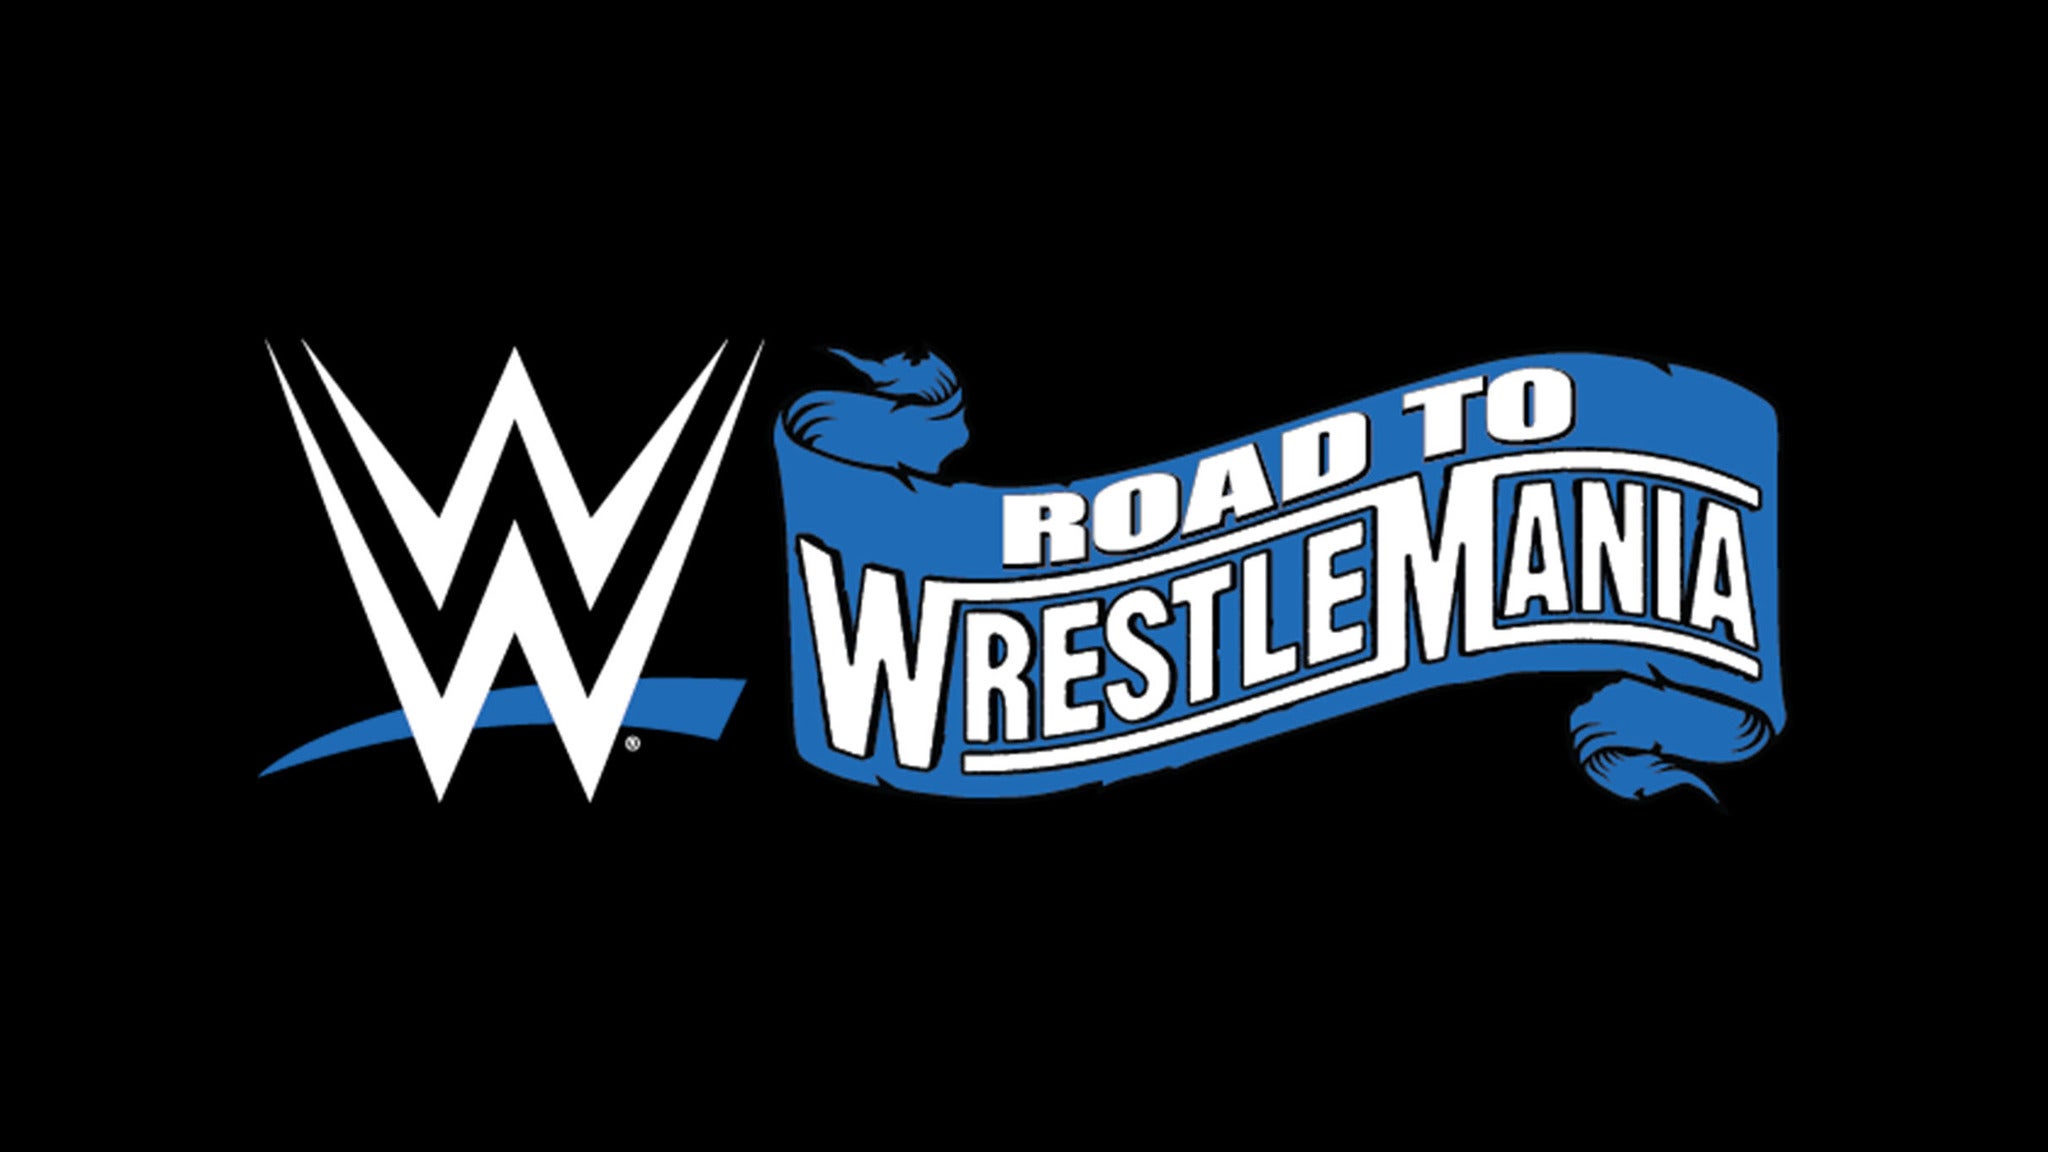 WWE Road to WrestleMania Tickets | Single Game Tickets & Schedule ...